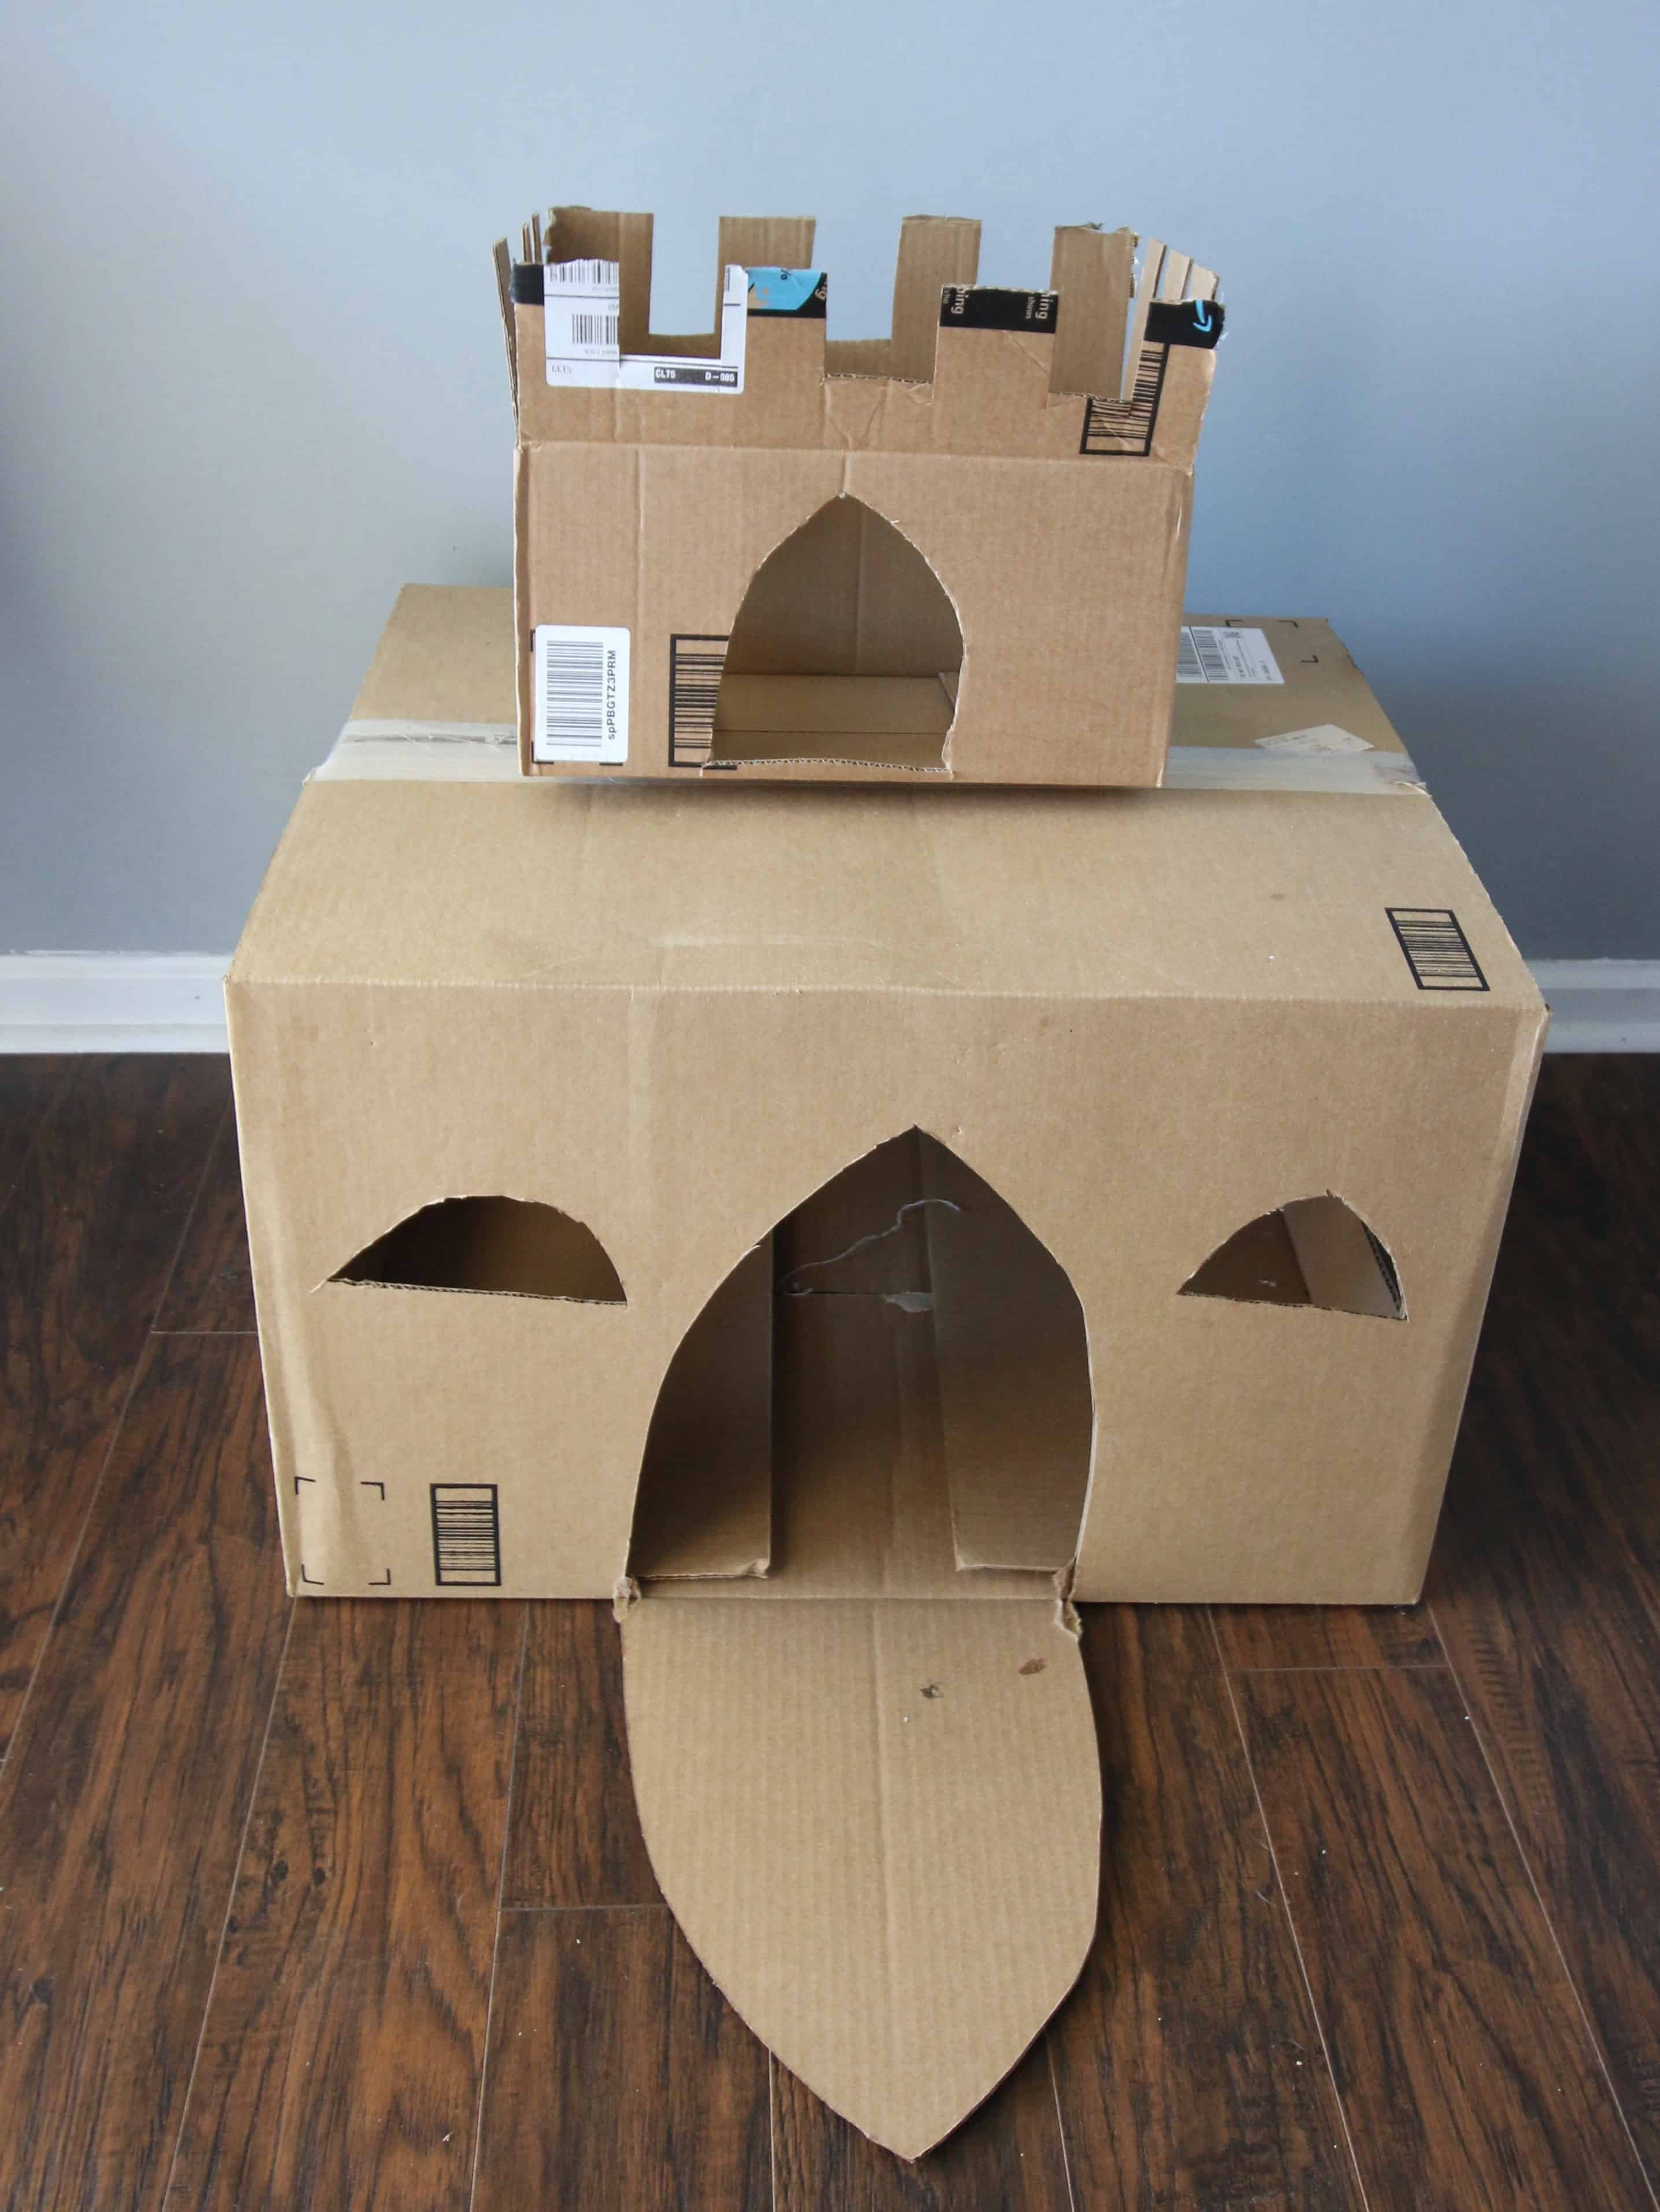 How to Build a DIY Cardboard Cat Castle via Charleston Crafted